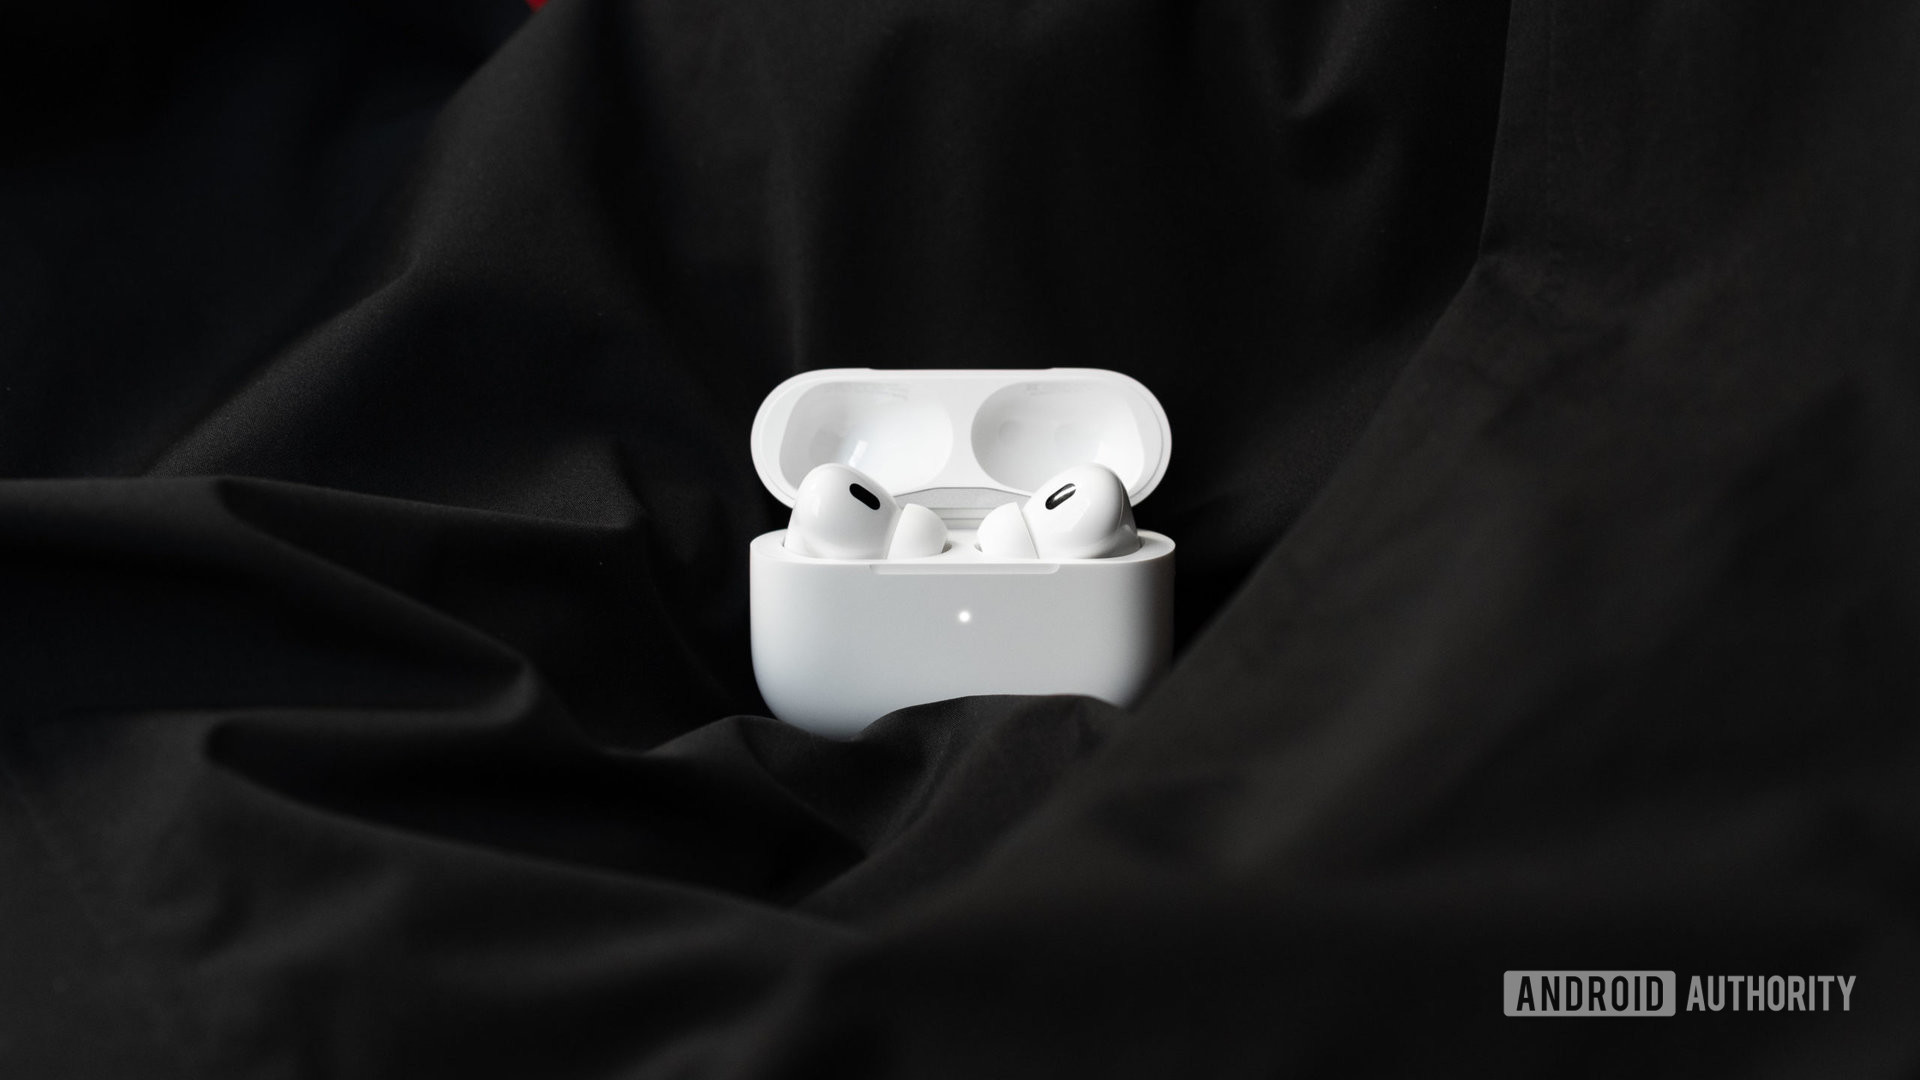 The Apple AirPods Pro (2nd generation) case is open to reveal the noise cancelling wireless earbuds inside.